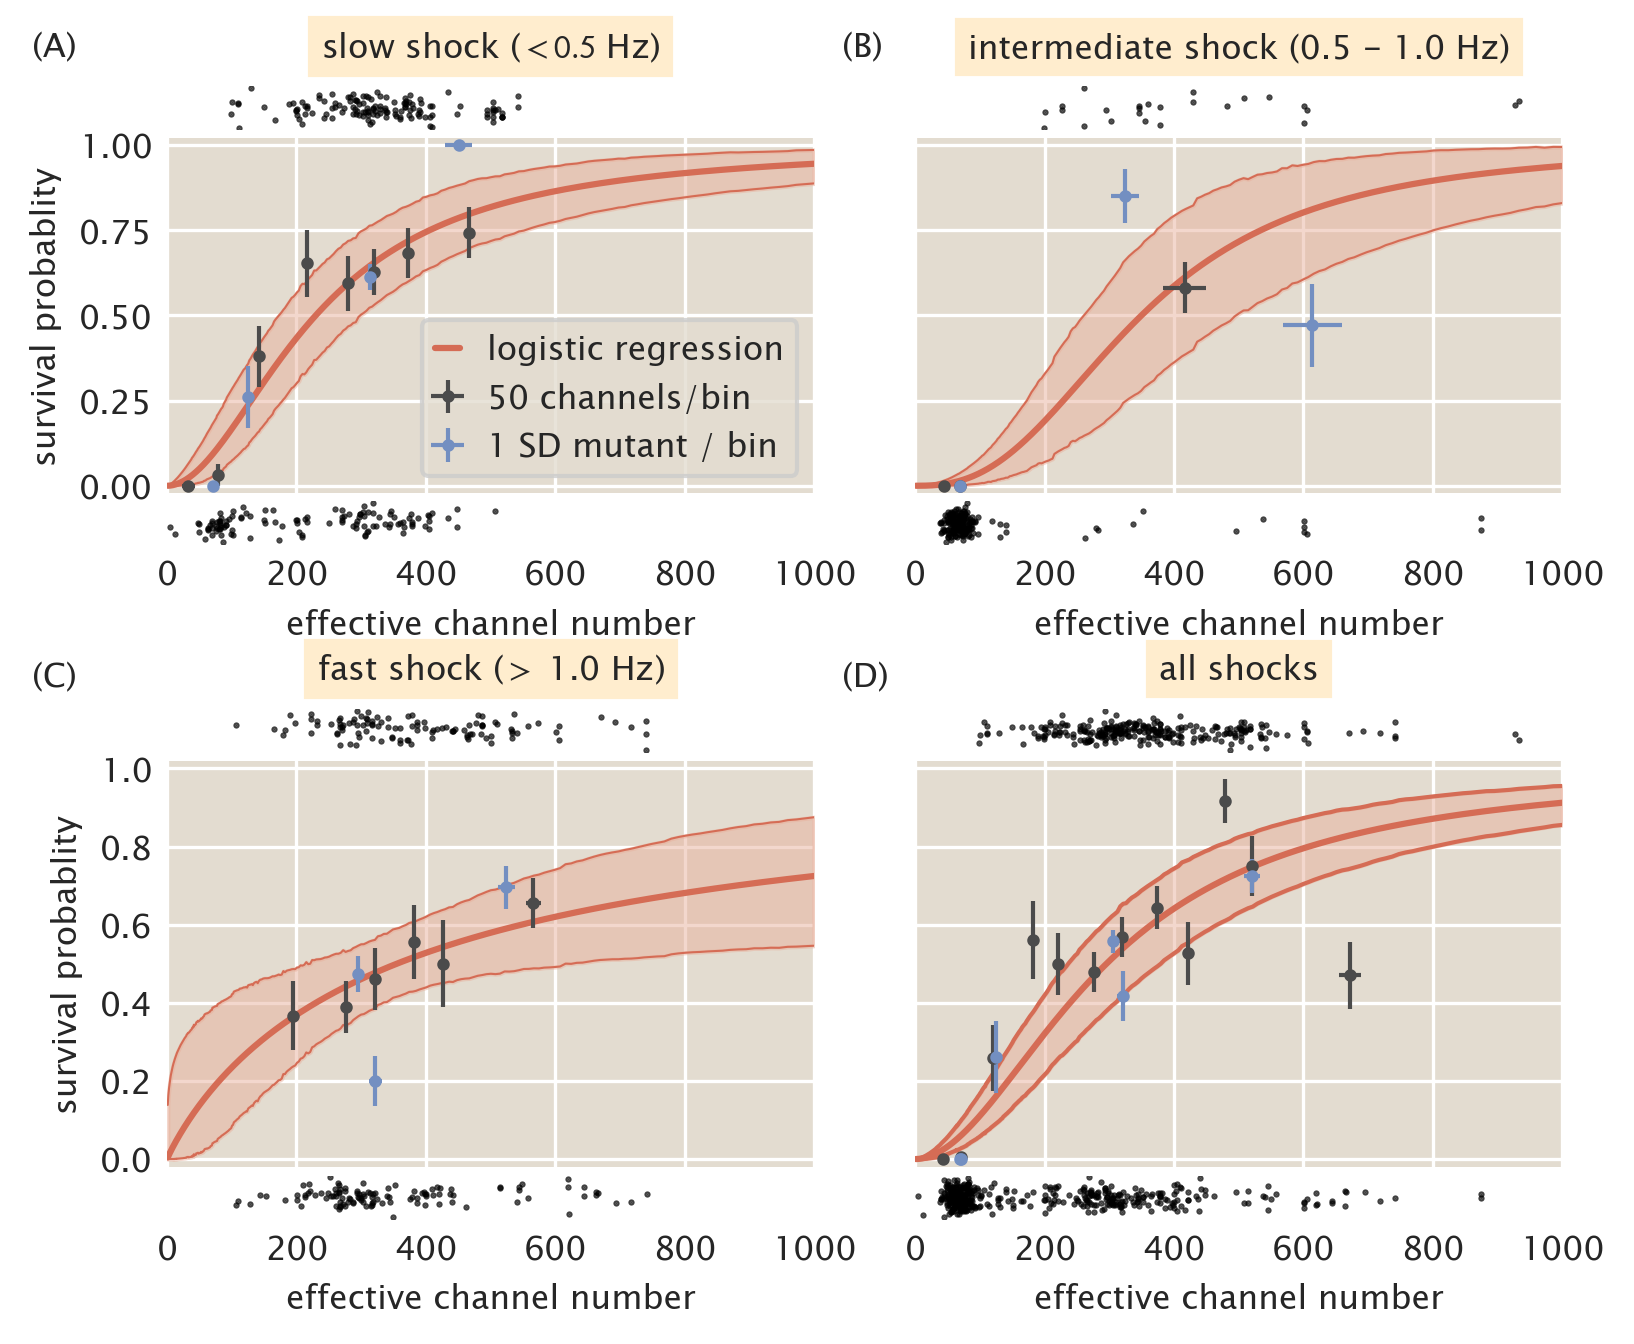 Figure 5: Coarse graining shock rates into different groups. Estimated survival probability curve for slow (A), intermediate (B), and fast (C) shock rates. (D) Estimated survival probability curve from pooling all data together, ignoring varying shock rates. Red shaded regions correspond to the 95% credible region of the survival probability estimated via logistic regression. Black points at top and bottom of each plot represent single-cell measurements of cells which survived and died, respectively. Black points and error bars represent survival probability calculations from bins of 50 channels per cell. Blue points represent the survival probability for a given Shine-Dalgarno mutant. Horizontal error bars are the standard error of the mean with at least 25 measurements and vertical error bars signifies the uncertainty in the survival probability from observing n survival events out of N total measurements.